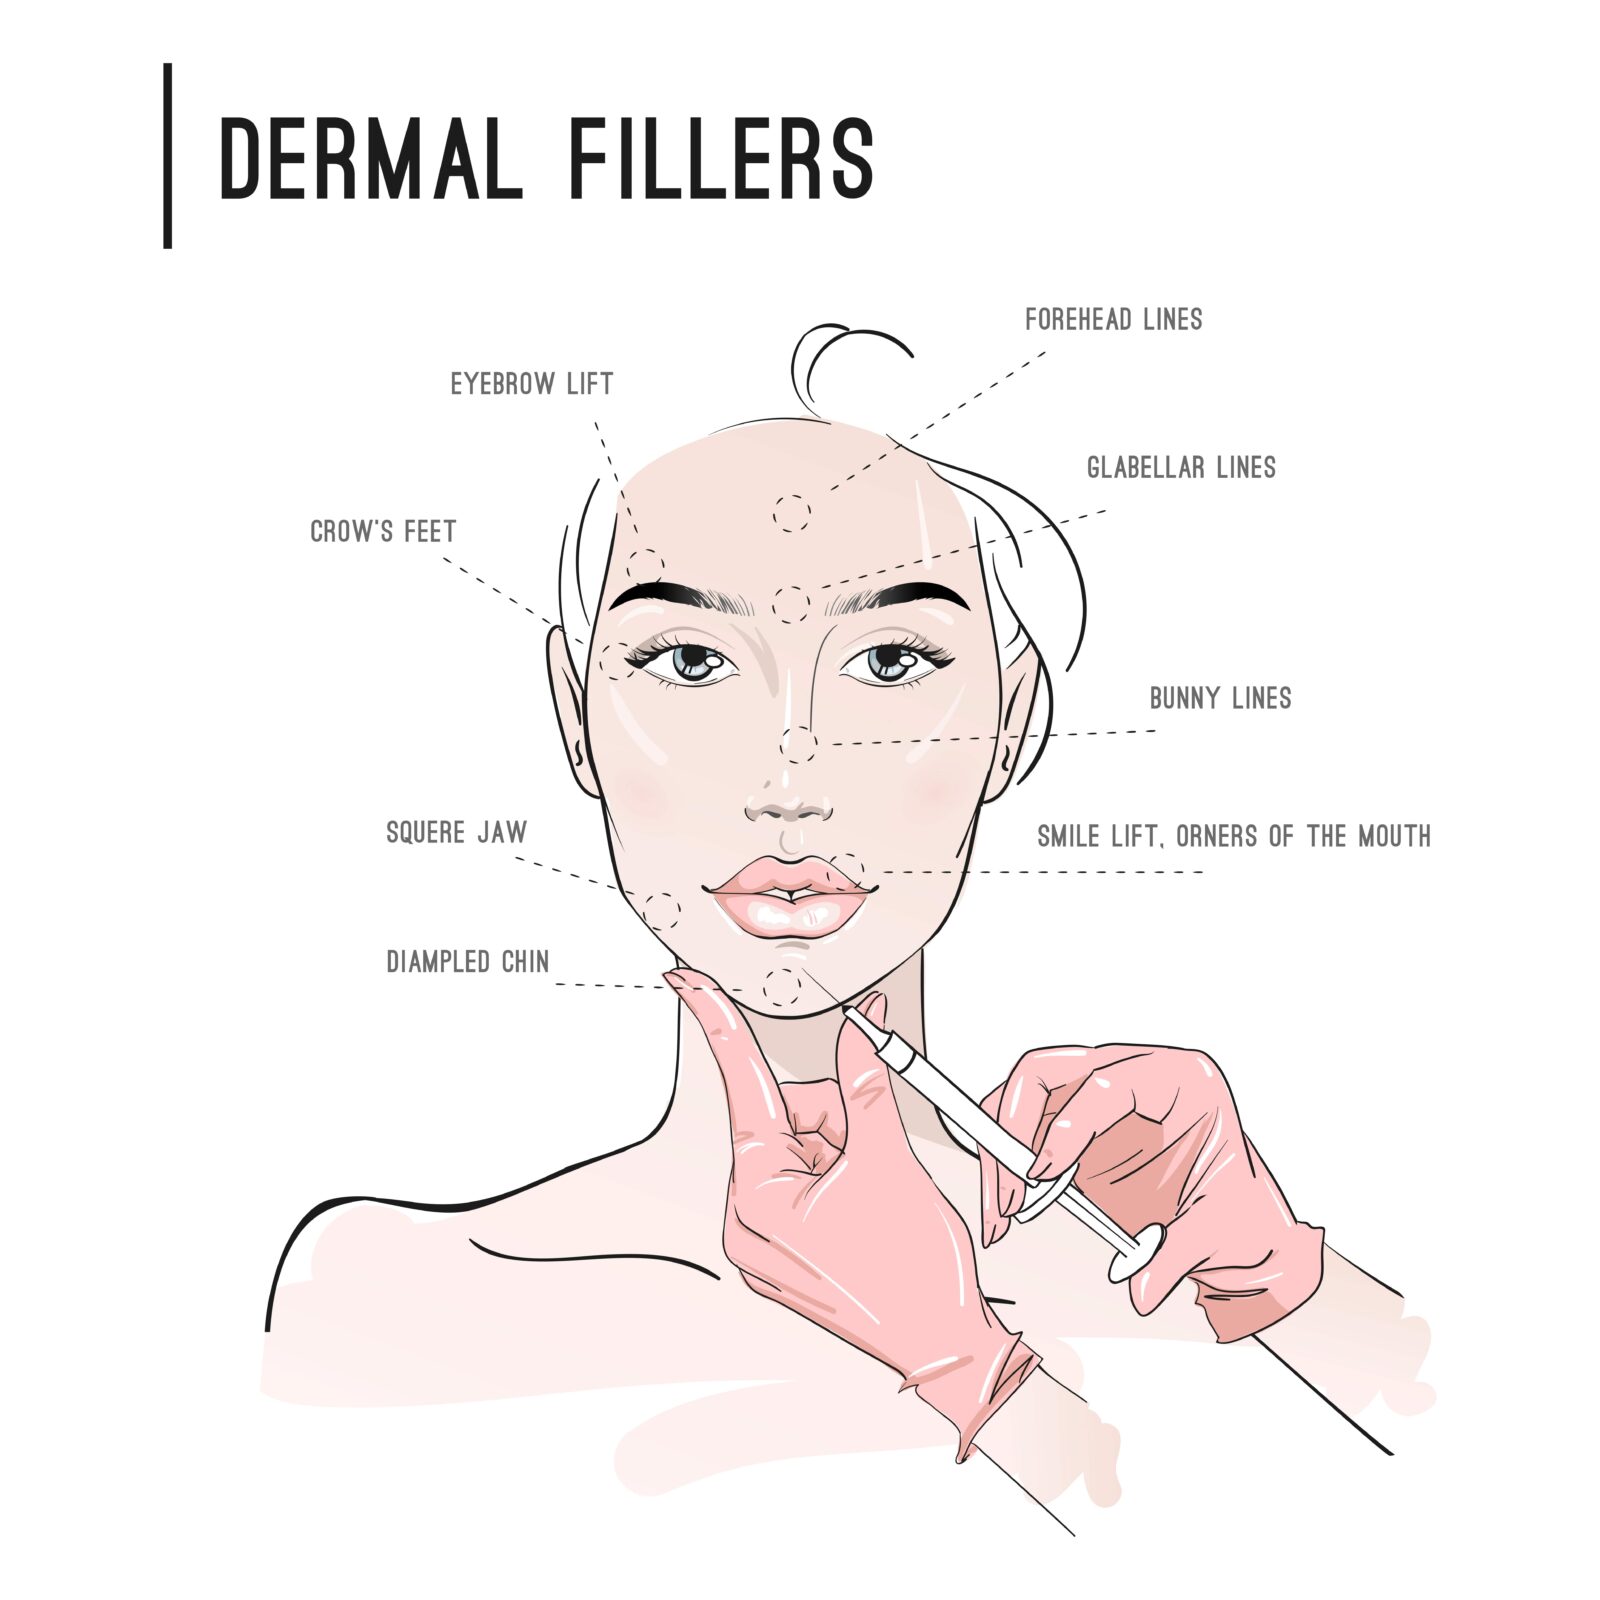 places where dermal fillers can be used